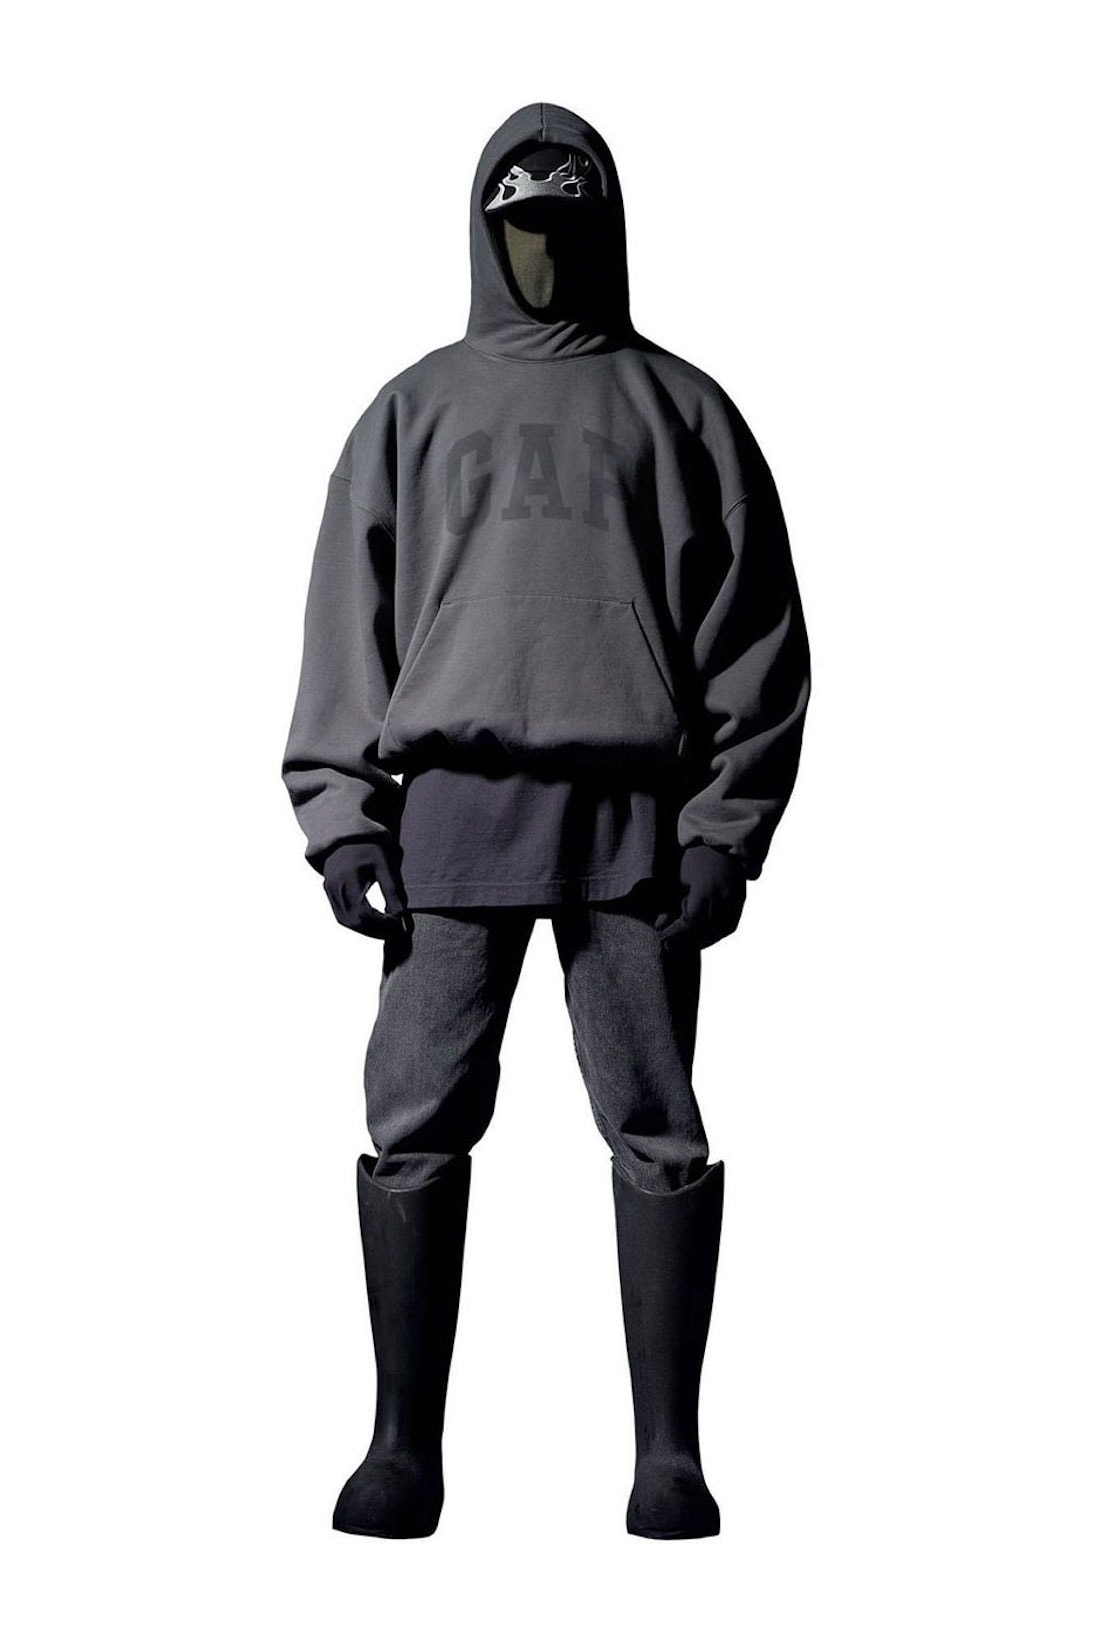  YEEZY Gap Engineered by Balenciaga Collection 2 Kanye West Demna Collaboration Hoodies Caps Pants